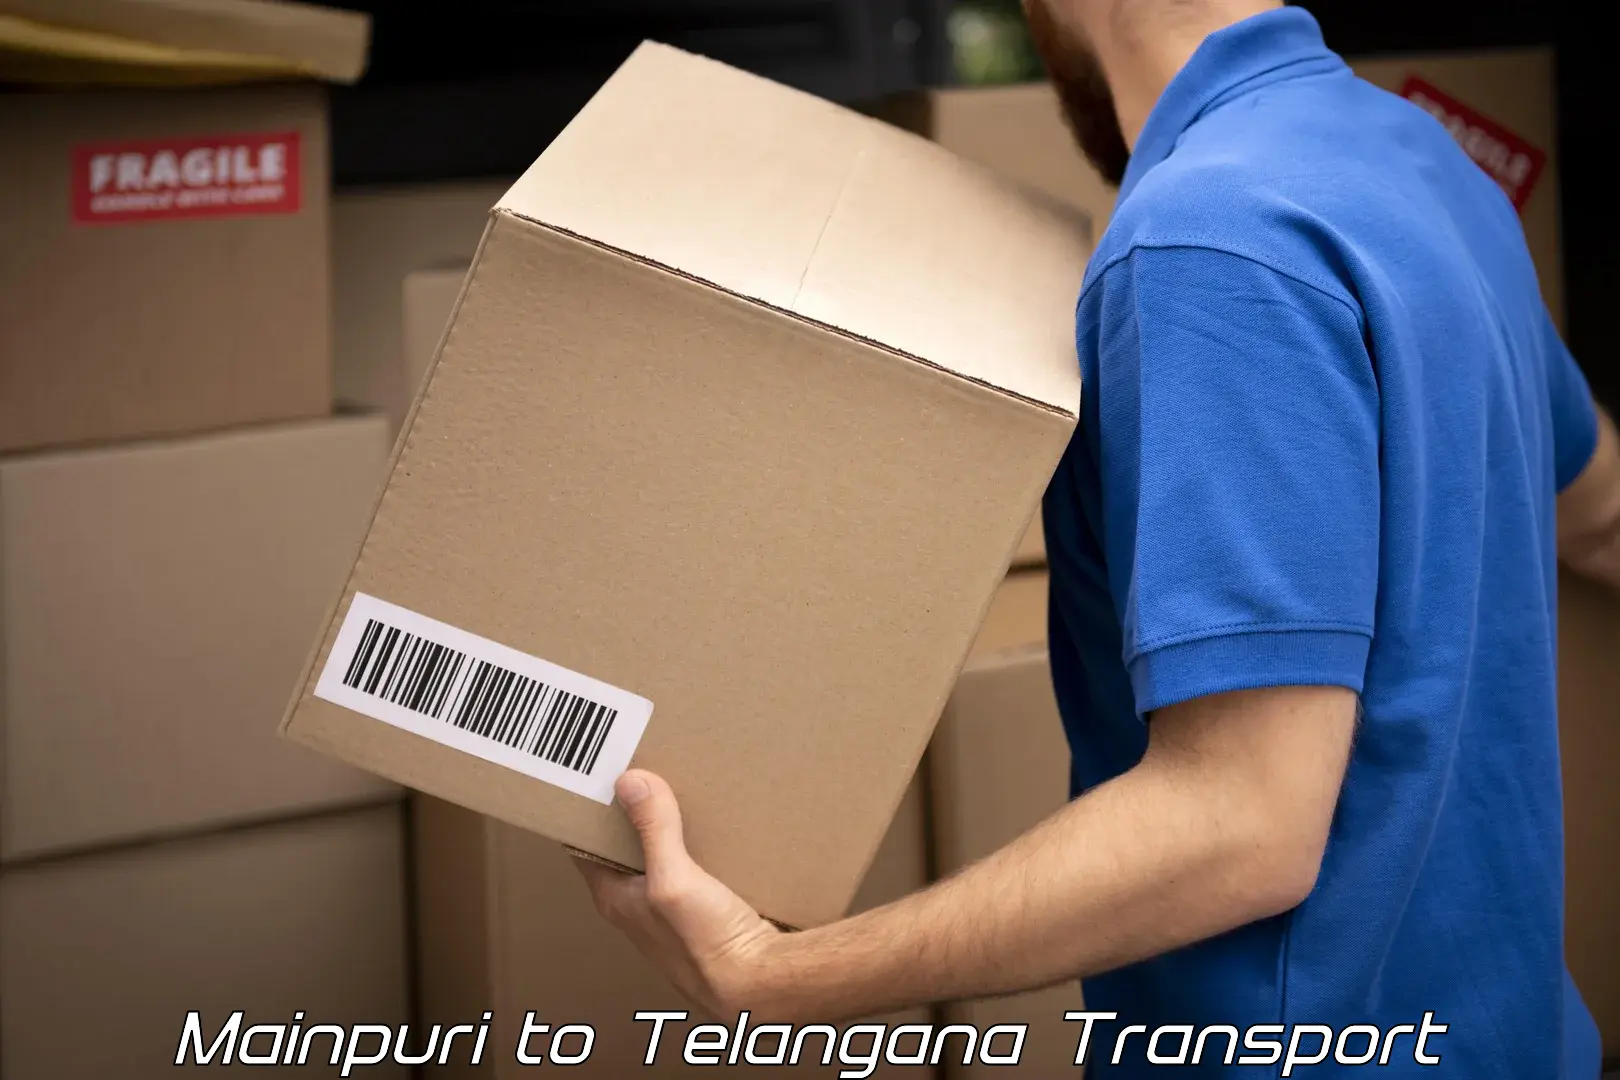 Container transport service Mainpuri to Bachupally